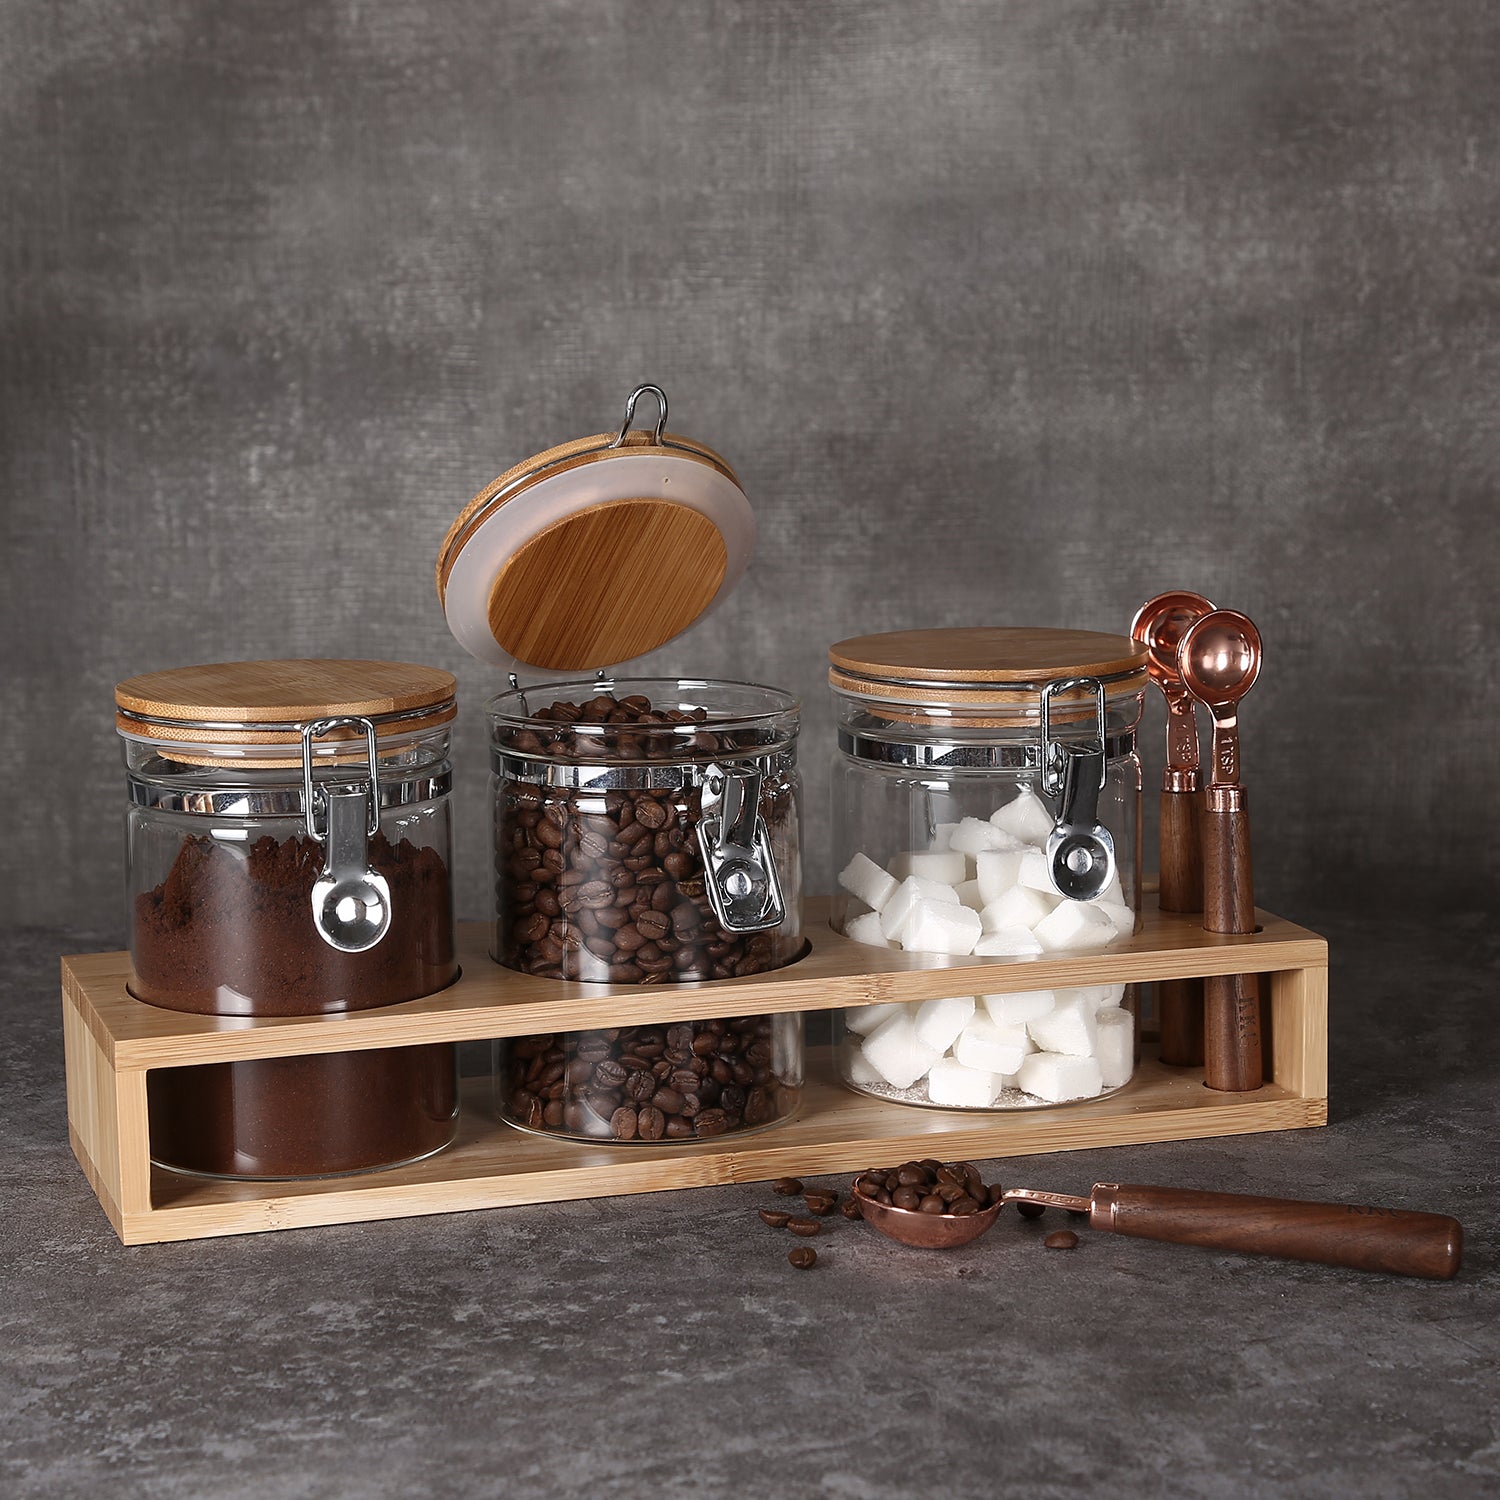 KKC HOME ACCENTS Clear Glass Cookies Jars with Airtight Lids,Airtight  cookie jars with Locking Clamp Lids for Kitchen Counter,Large Sealed Glass  Jars